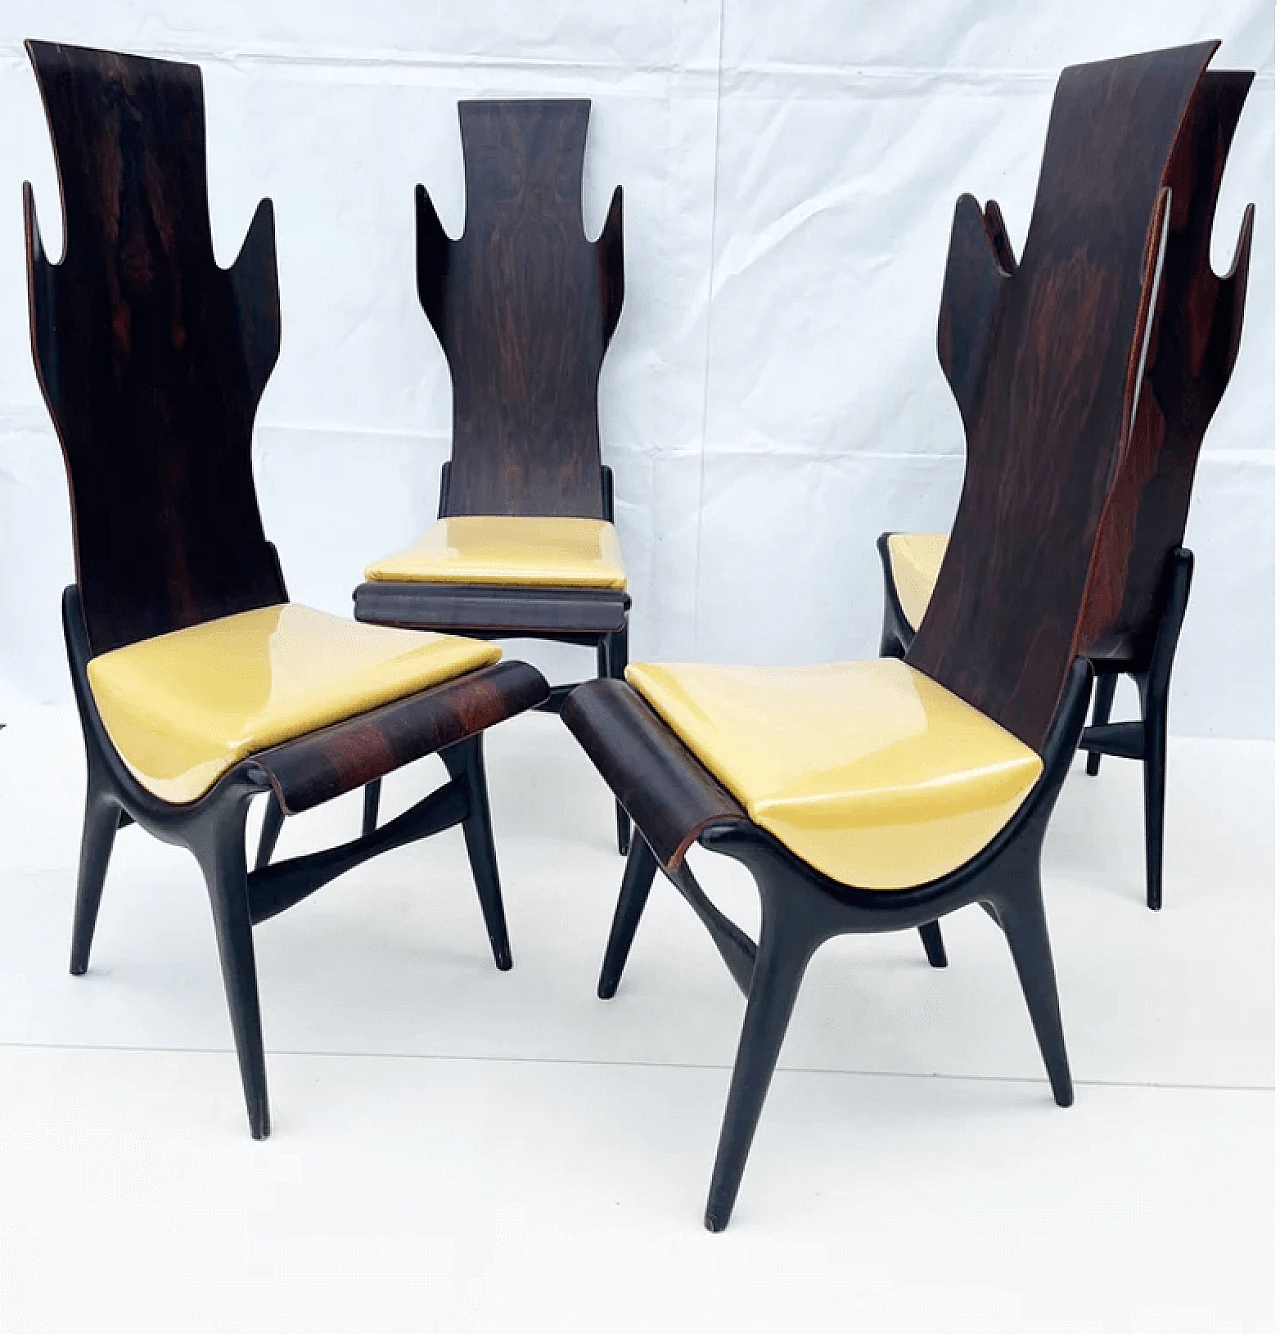 A table with 4 chairs by Dante Latorre, 1950s 5